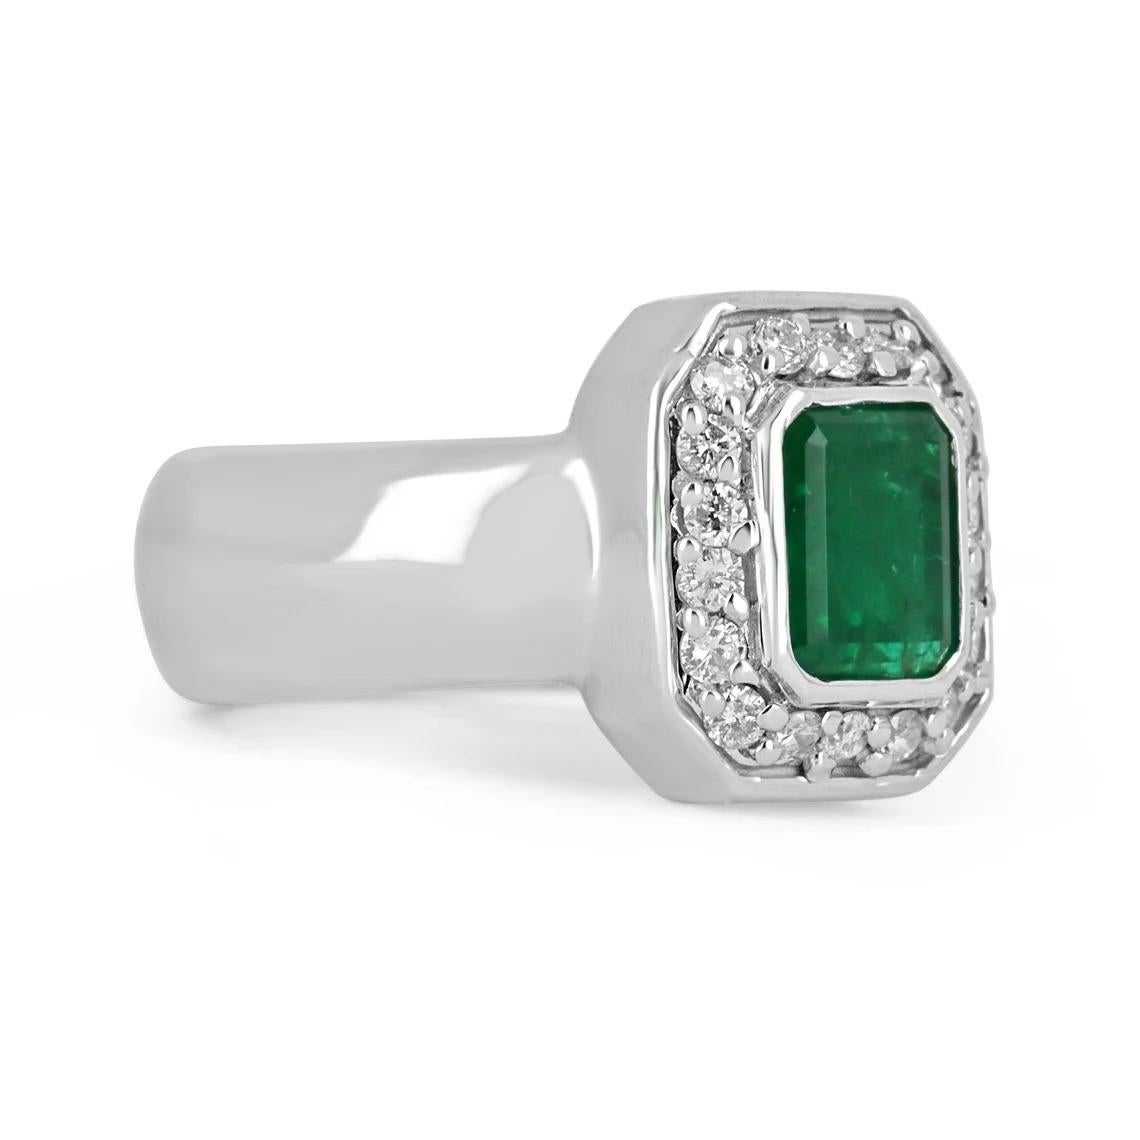 Elegance and sophistication are what this gorgeous emerald and diamond ring is all about. The emerald is almost a full two carats, bezel-set, and accented by brilliant round diamonds creating a gorgeous halo around the center stone; set in a modern